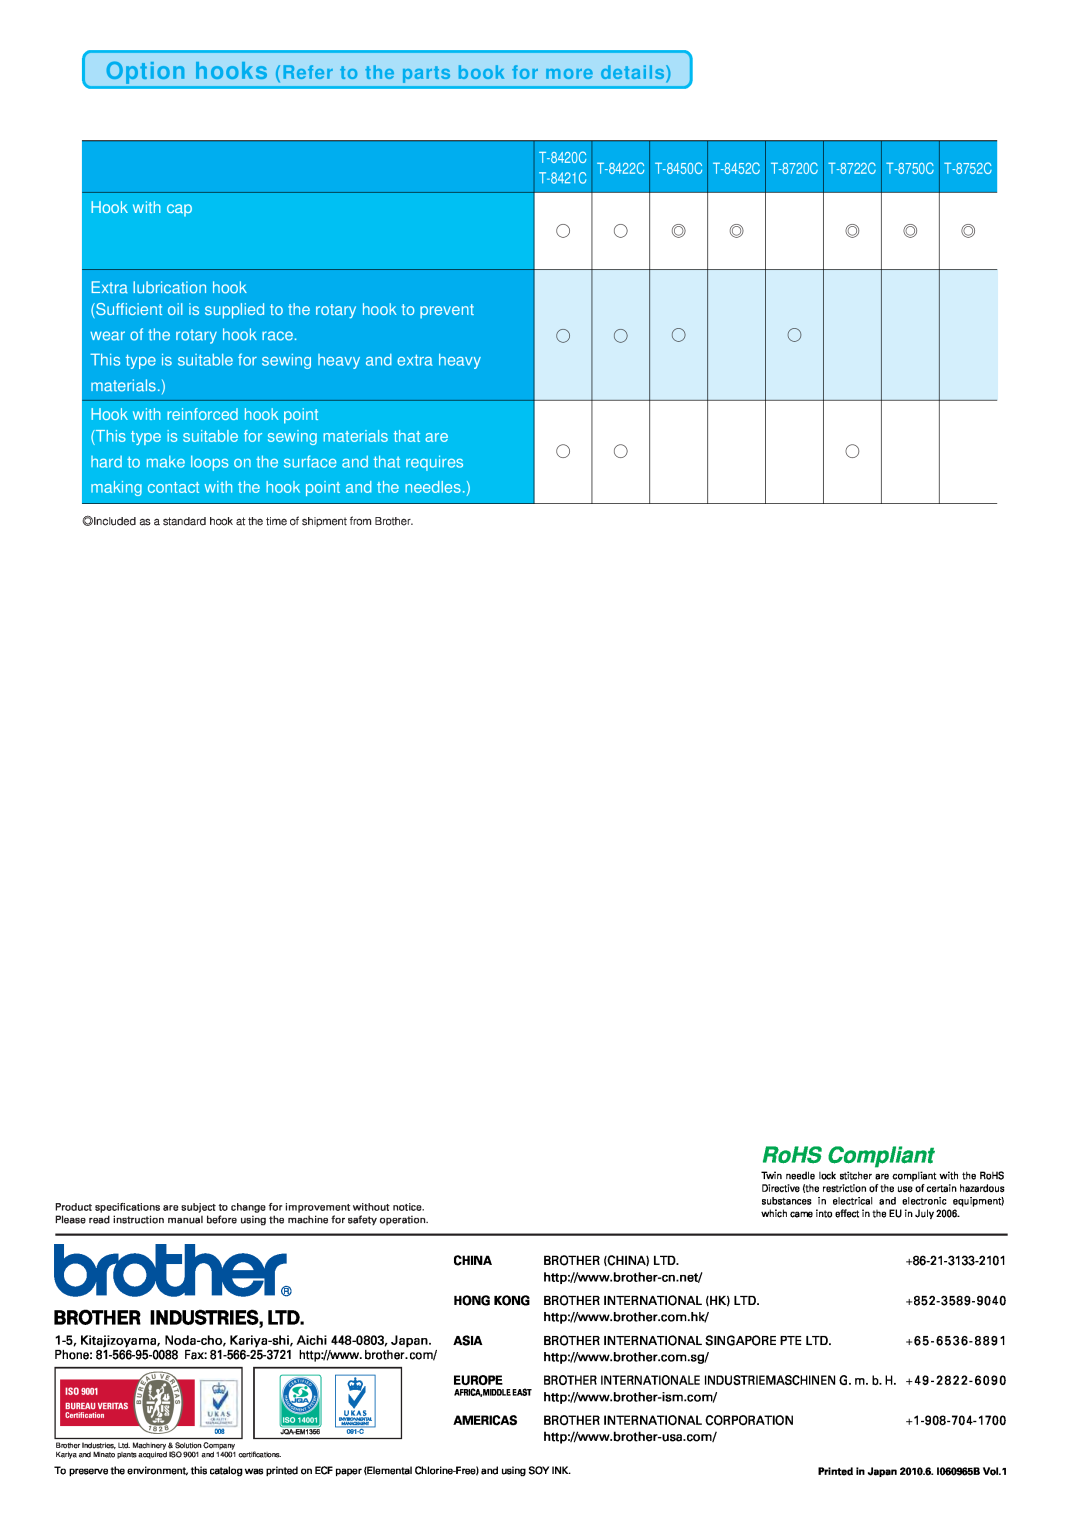 Brother T-8421C manual RoHS Compliant, Option hooks Refer to the parts book for more details 